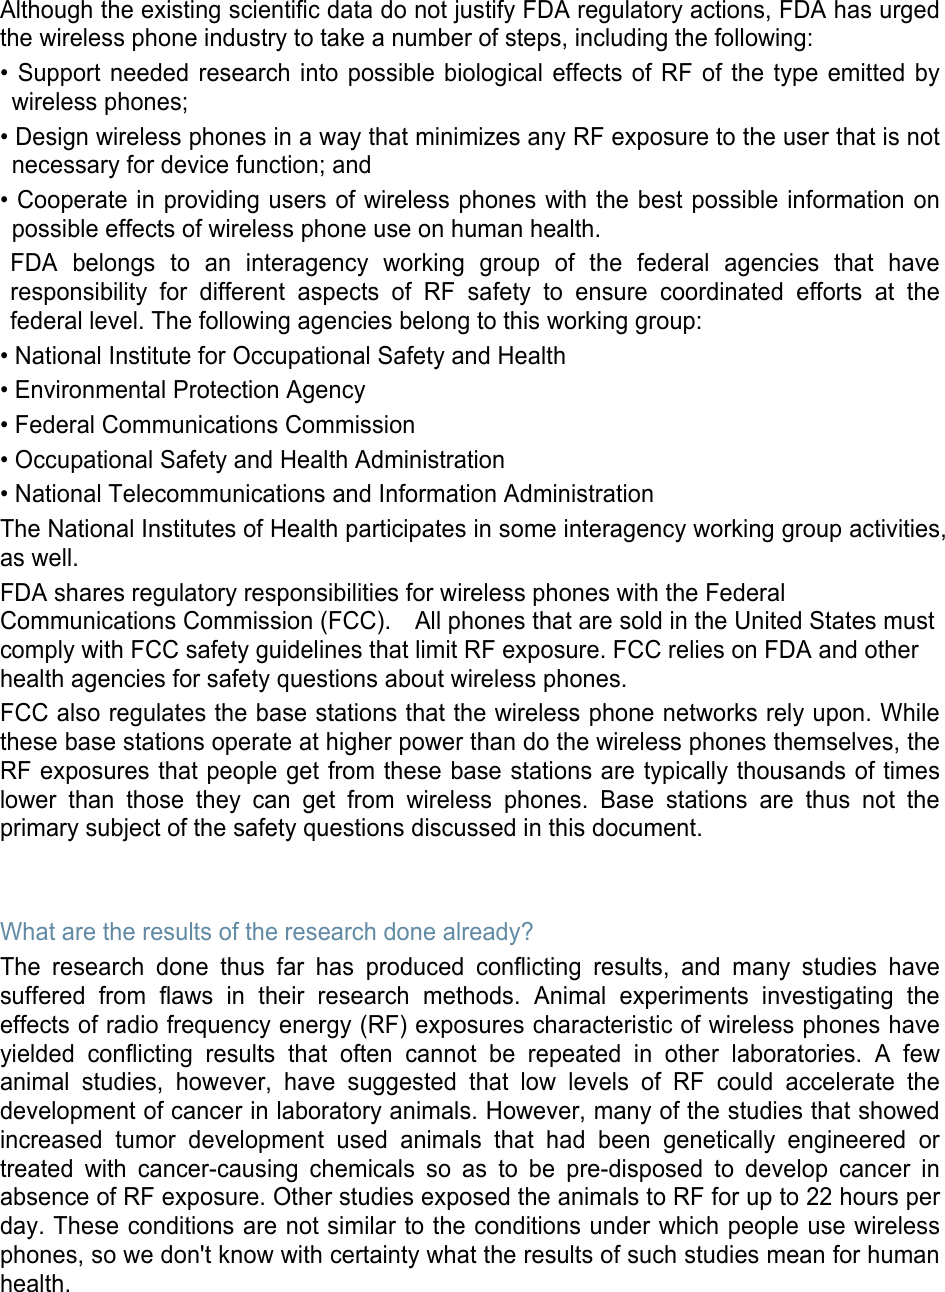 Although the existing scientific data do not justify FDA regulatory actions, FDA has urged the wireless phone industry to take a number of steps, including the following: • Support needed research into possible biological effects of RF of the type emitted bywireless phones;• Design wireless phones in a way that minimizes any RF exposure to the user that is notnecessary for device function; and• Cooperate in providing users of wireless phones with the best possible information onpossible effects of wireless phone use on human health.FDA belongs to an interagency working group of the federal agencies that haveresponsibility for different aspects of RF safety to ensure coordinated efforts at thefederal level. The following agencies belong to this working group:• National Institute for Occupational Safety and Health• Environmental Protection Agency• Federal Communications Commission• Occupational Safety and Health Administration• National Telecommunications and Information AdministrationThe National Institutes of Health participates in some interagency working group activities, as well. FDA shares regulatory responsibilities for wireless phones with the Federal Communications Commission (FCC).    All phones that are sold in the United States must comply with FCC safety guidelines that limit RF exposure. FCC relies on FDA and other health agencies for safety questions about wireless phones. FCC also regulates the base stations that the wireless phone networks rely upon. While these base stations operate at higher power than do the wireless phones themselves, the RF exposures that people get from these base stations are typically thousands of times lower than those they can get from wireless phones. Base stations are thus not the primary subject of the safety questions discussed in this document. What are the results of the research done already? The research done thus far has produced conflicting results, and many studies have suffered from flaws in their research methods. Animal experiments investigating the effects of radio frequency energy (RF) exposures characteristic of wireless phones have yielded conflicting results that often cannot be repeated in other laboratories. A few animal studies, however, have suggested that low levels of RF could accelerate the development of cancer in laboratory animals. However, many of the studies that showed increased tumor development used animals that had been genetically engineered or treated with cancer-causing chemicals so as to be pre-disposed to develop cancer in absence of RF exposure. Other studies exposed the animals to RF for up to 22 hours per day. These conditions are not similar to the conditions under which people use wireless phones, so we don&apos;t know with certainty what the results of such studies mean for human health. 